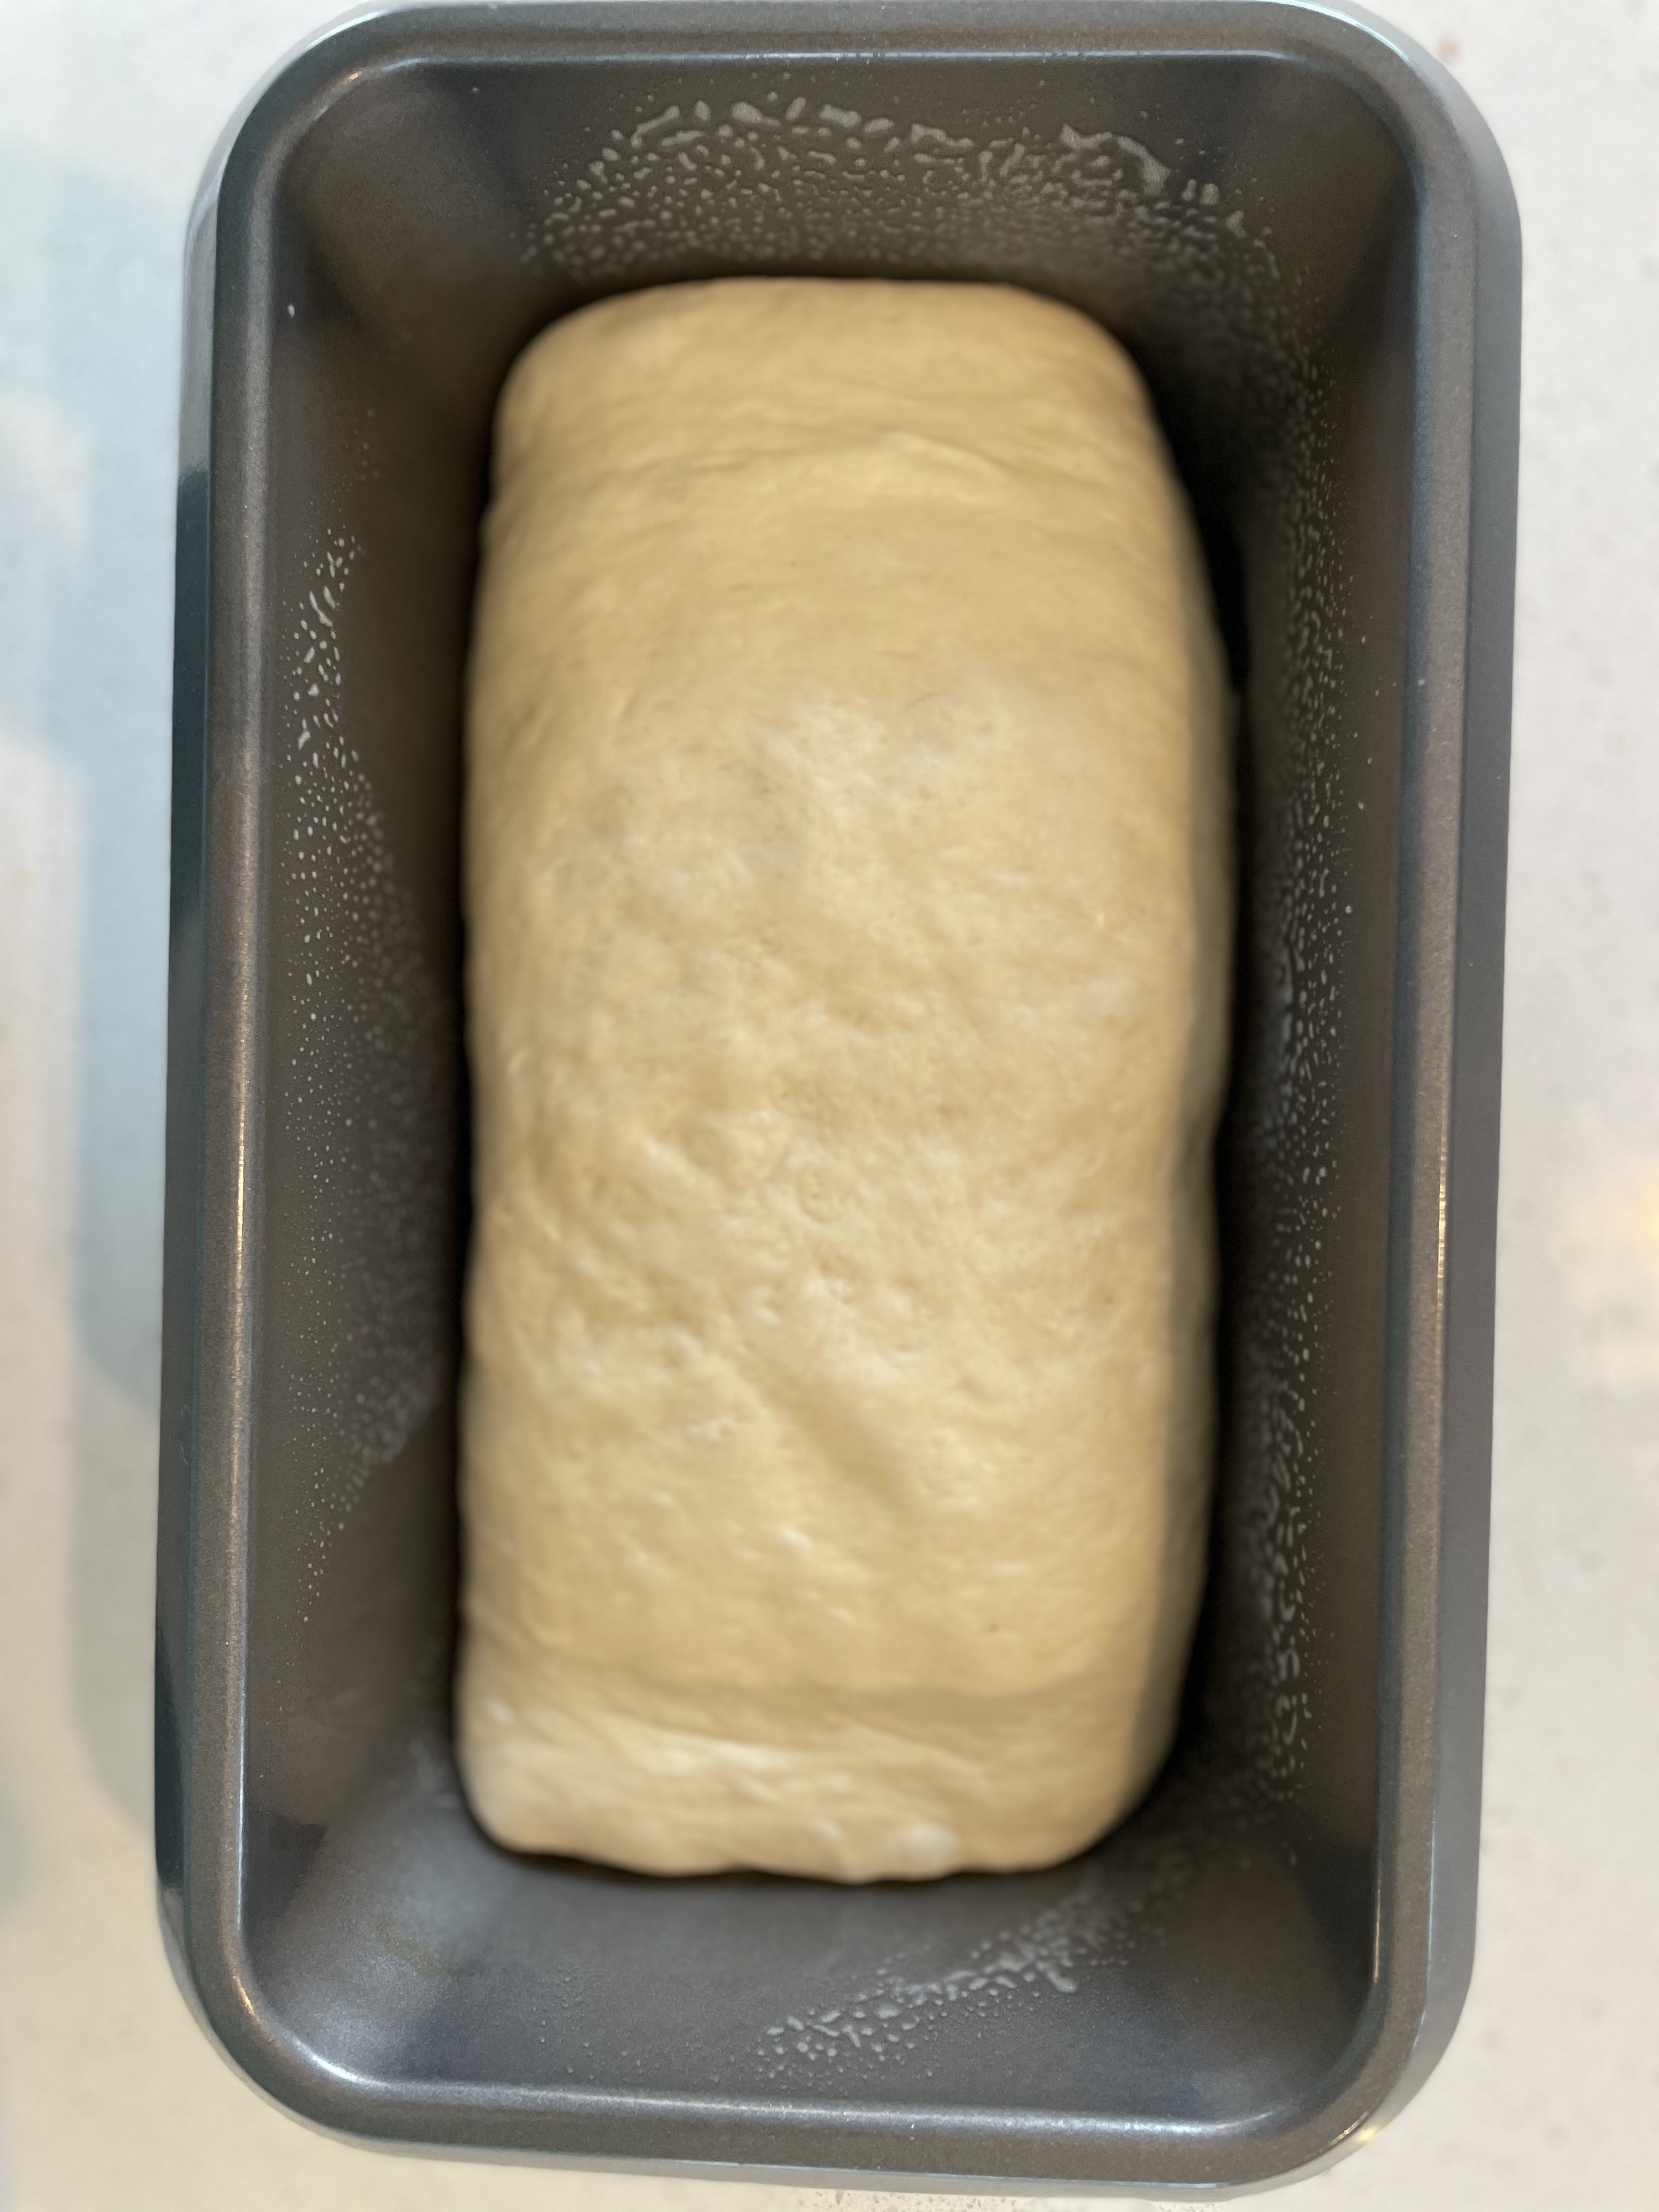 Raw dough in a loaf pan